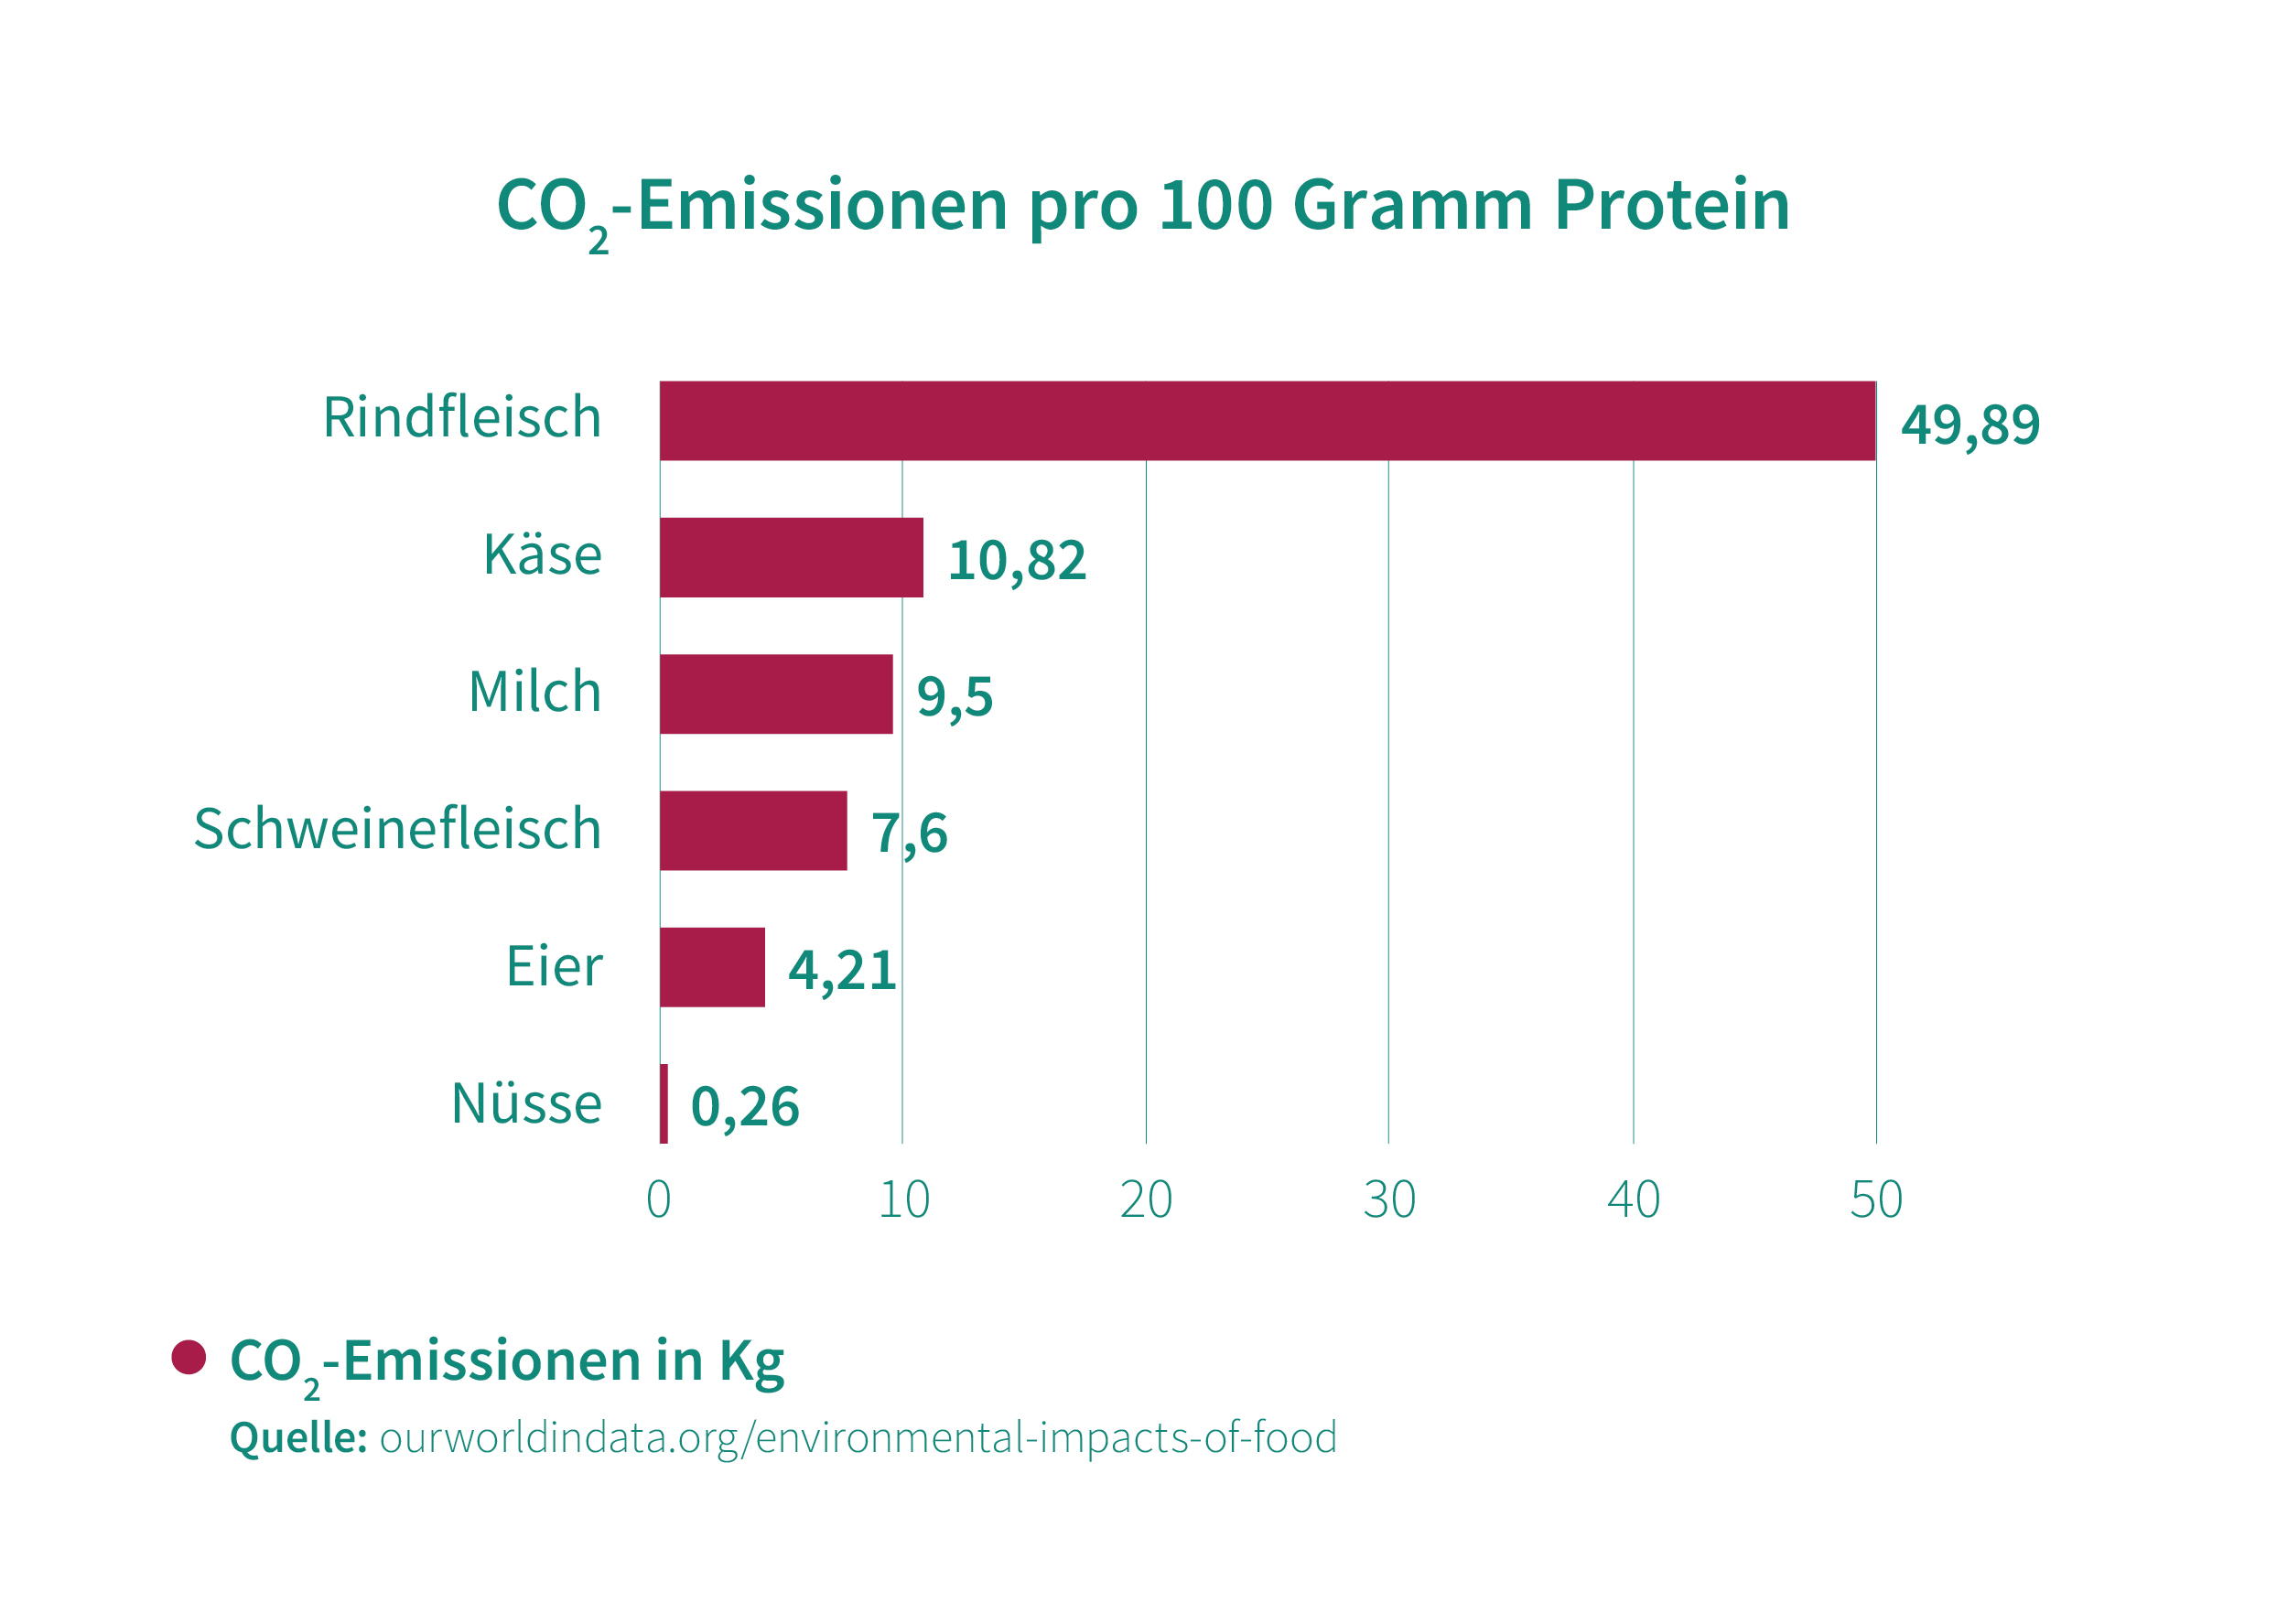 The graph shows that beef, cheese, milk and pork in particular cause a lot of CO2 emissions per protein.